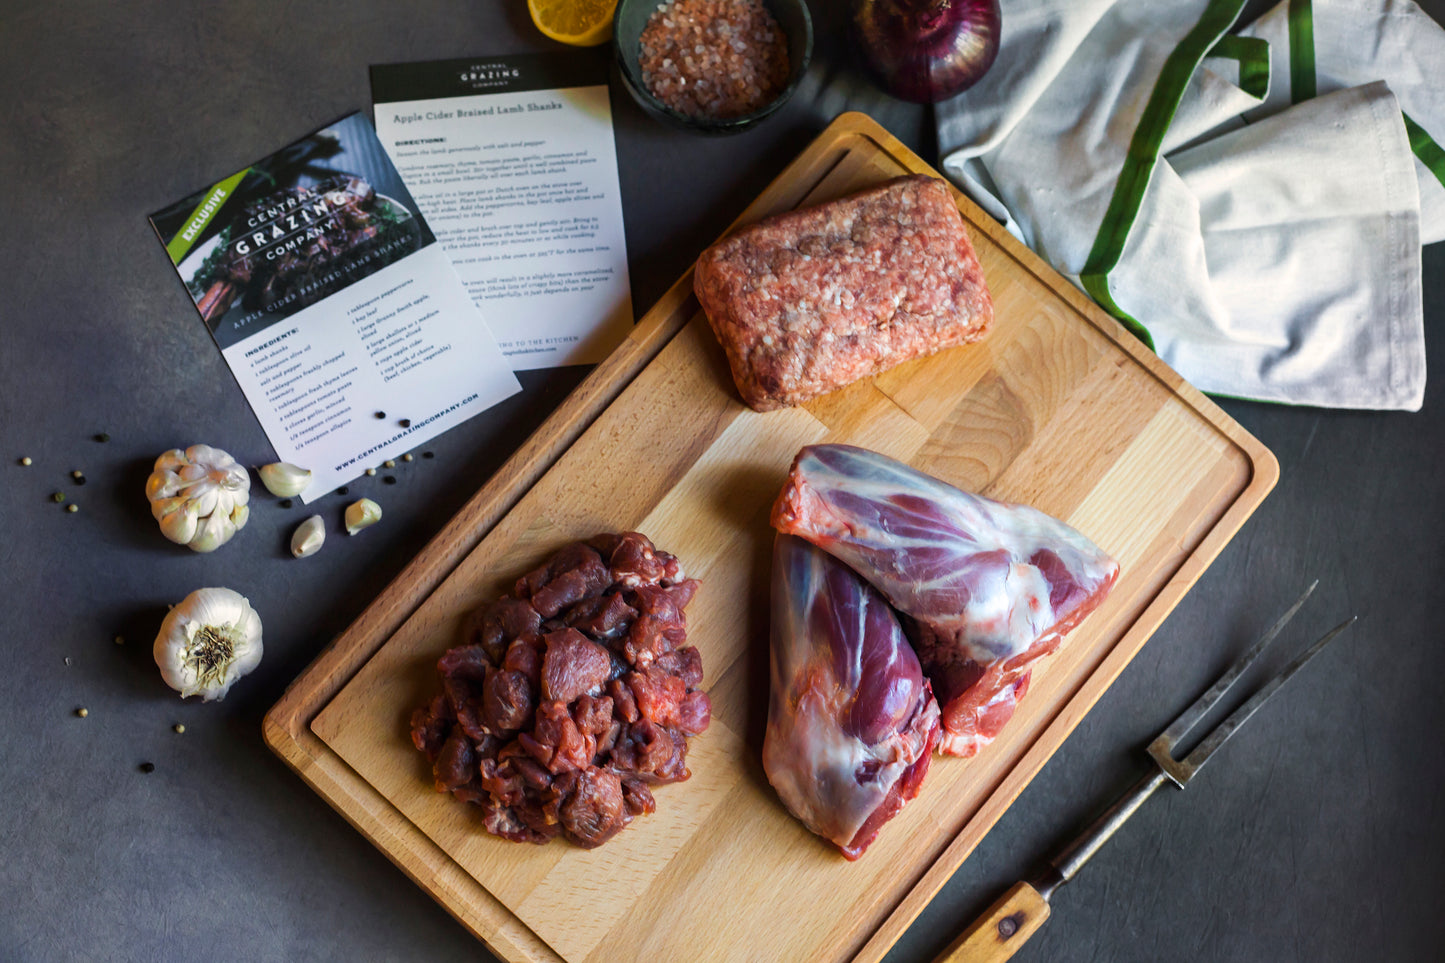 Lamb Box Monthly Subscription